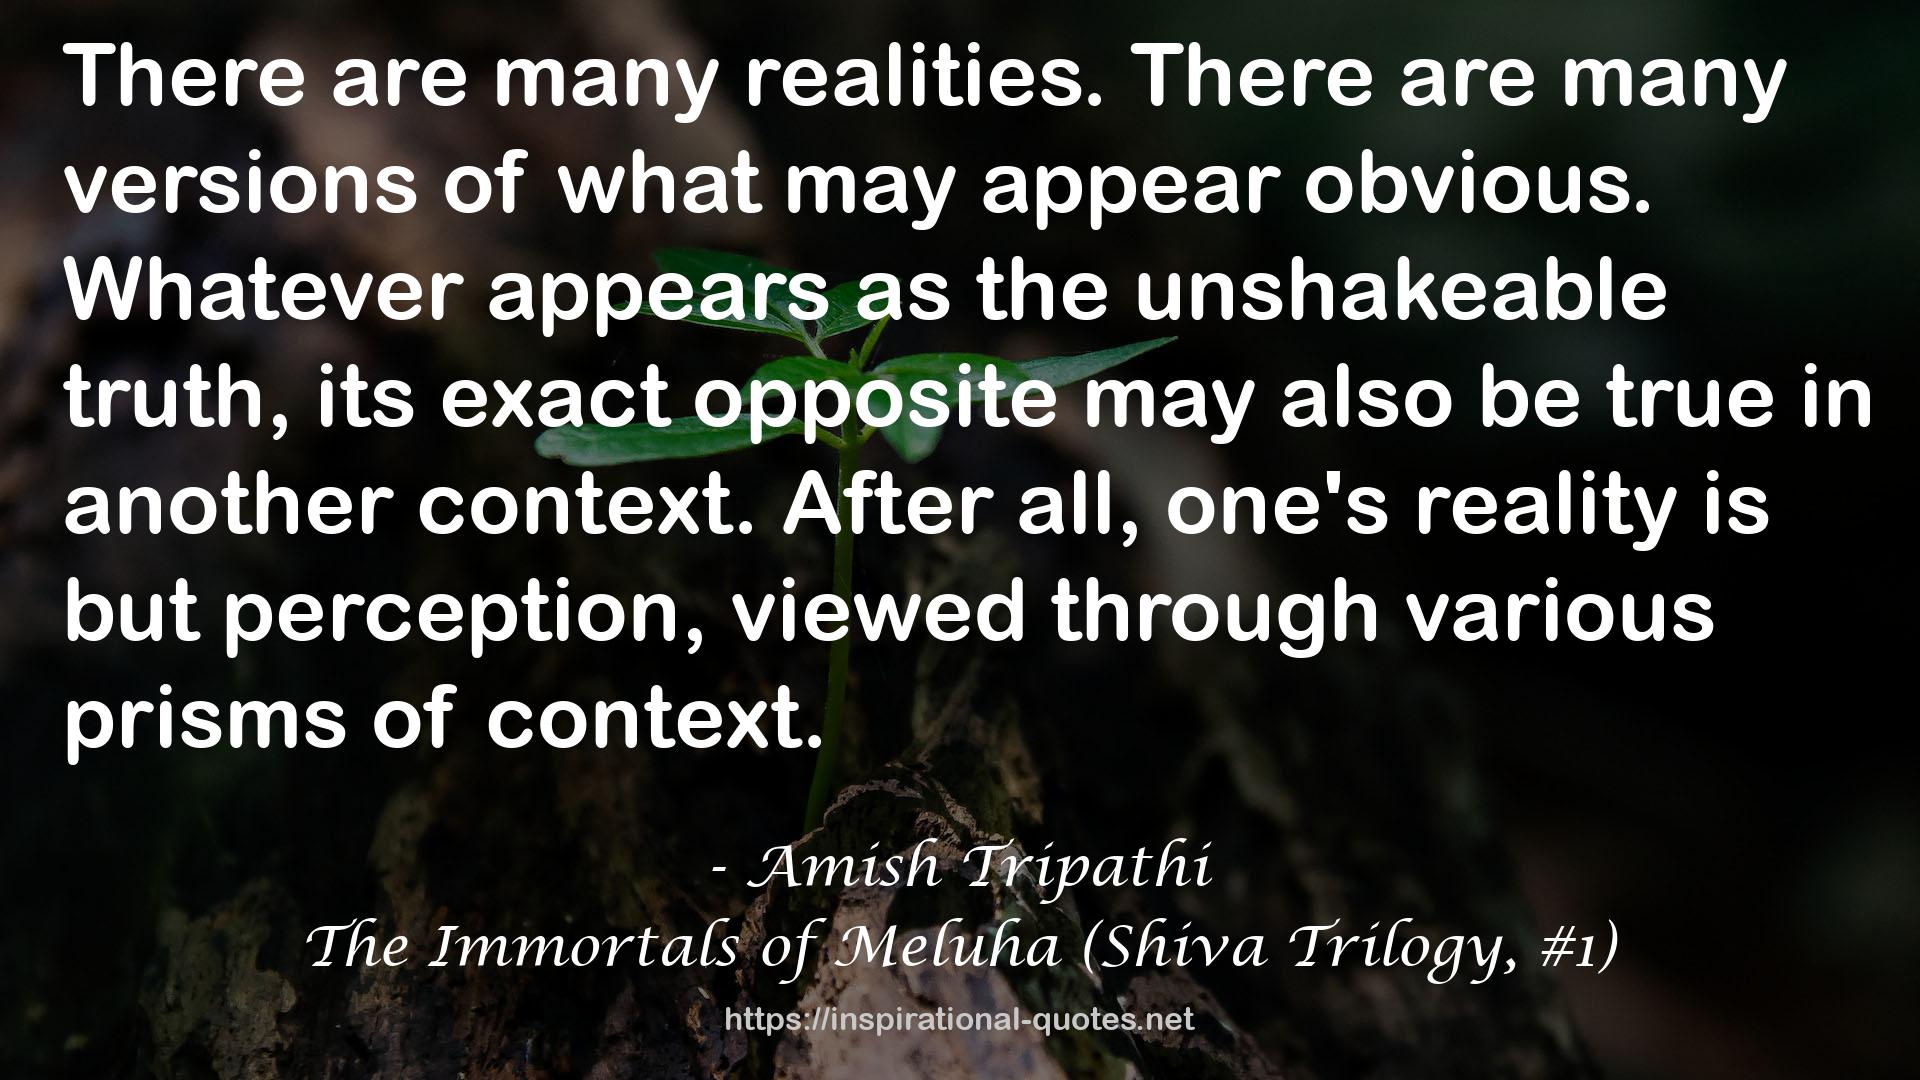 The Immortals of Meluha (Shiva Trilogy, #1) QUOTES